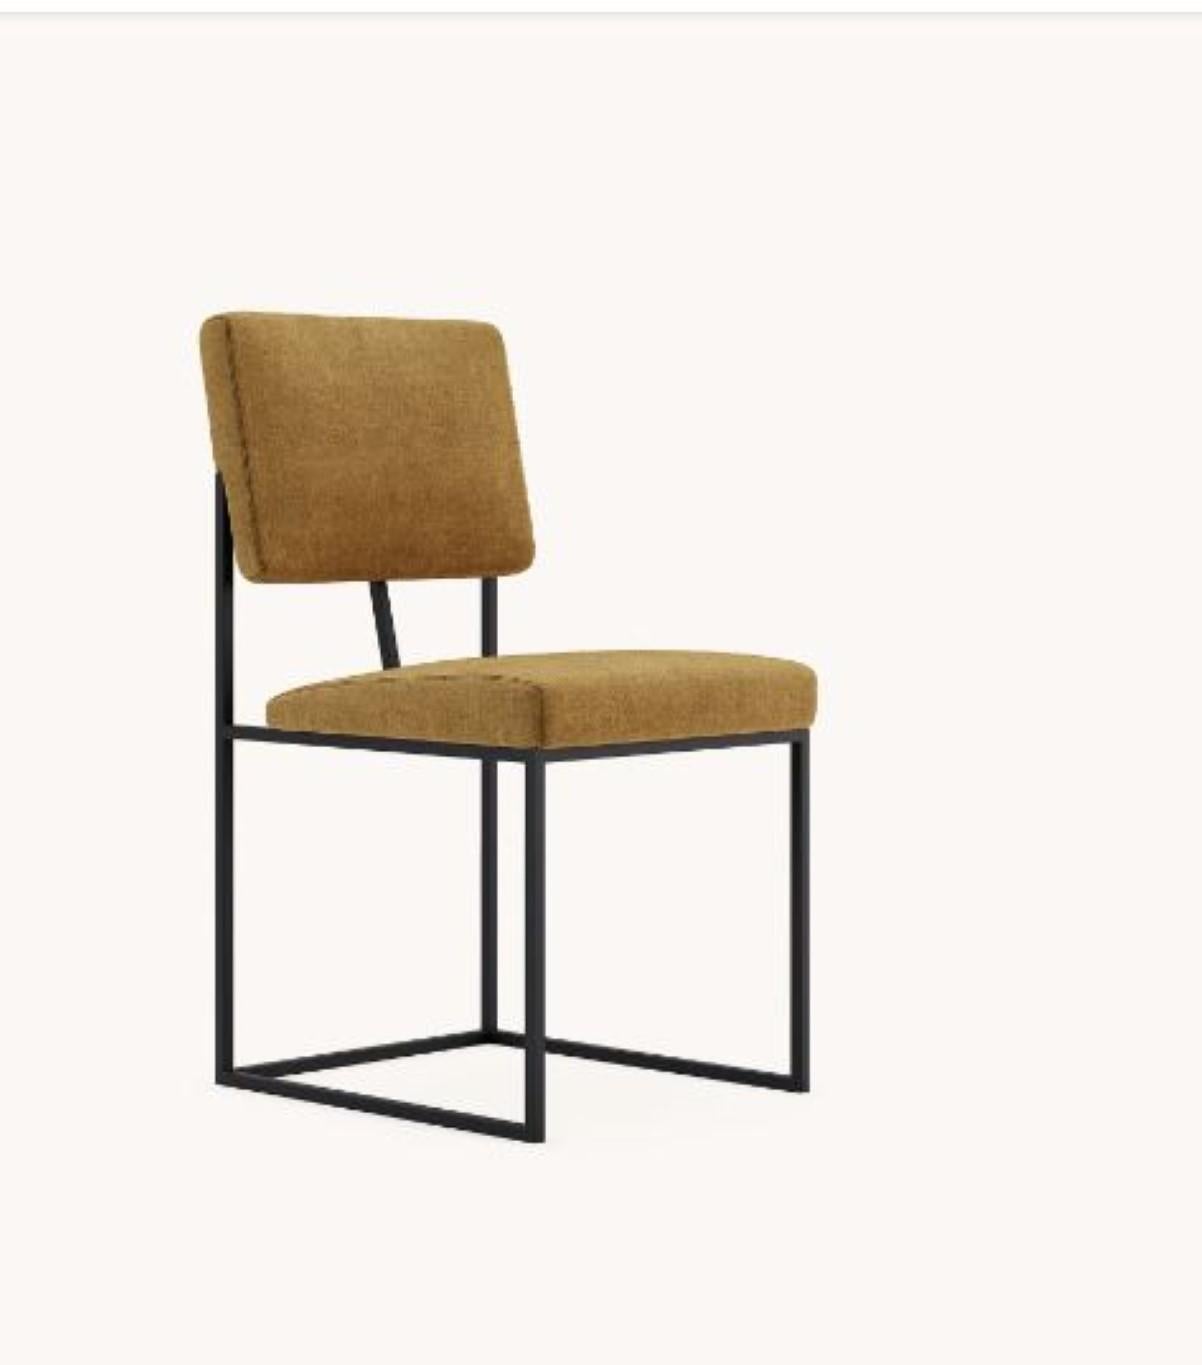 Gram chair by Domkapa
Materials: Fabric, Black Texturized Steel.
Dimensions: W 44 x D 54 x H 86 cm. 
Also available in different materials. 

Eva is the perfect mix of contemporary design and antique production techniques, engraved on the back